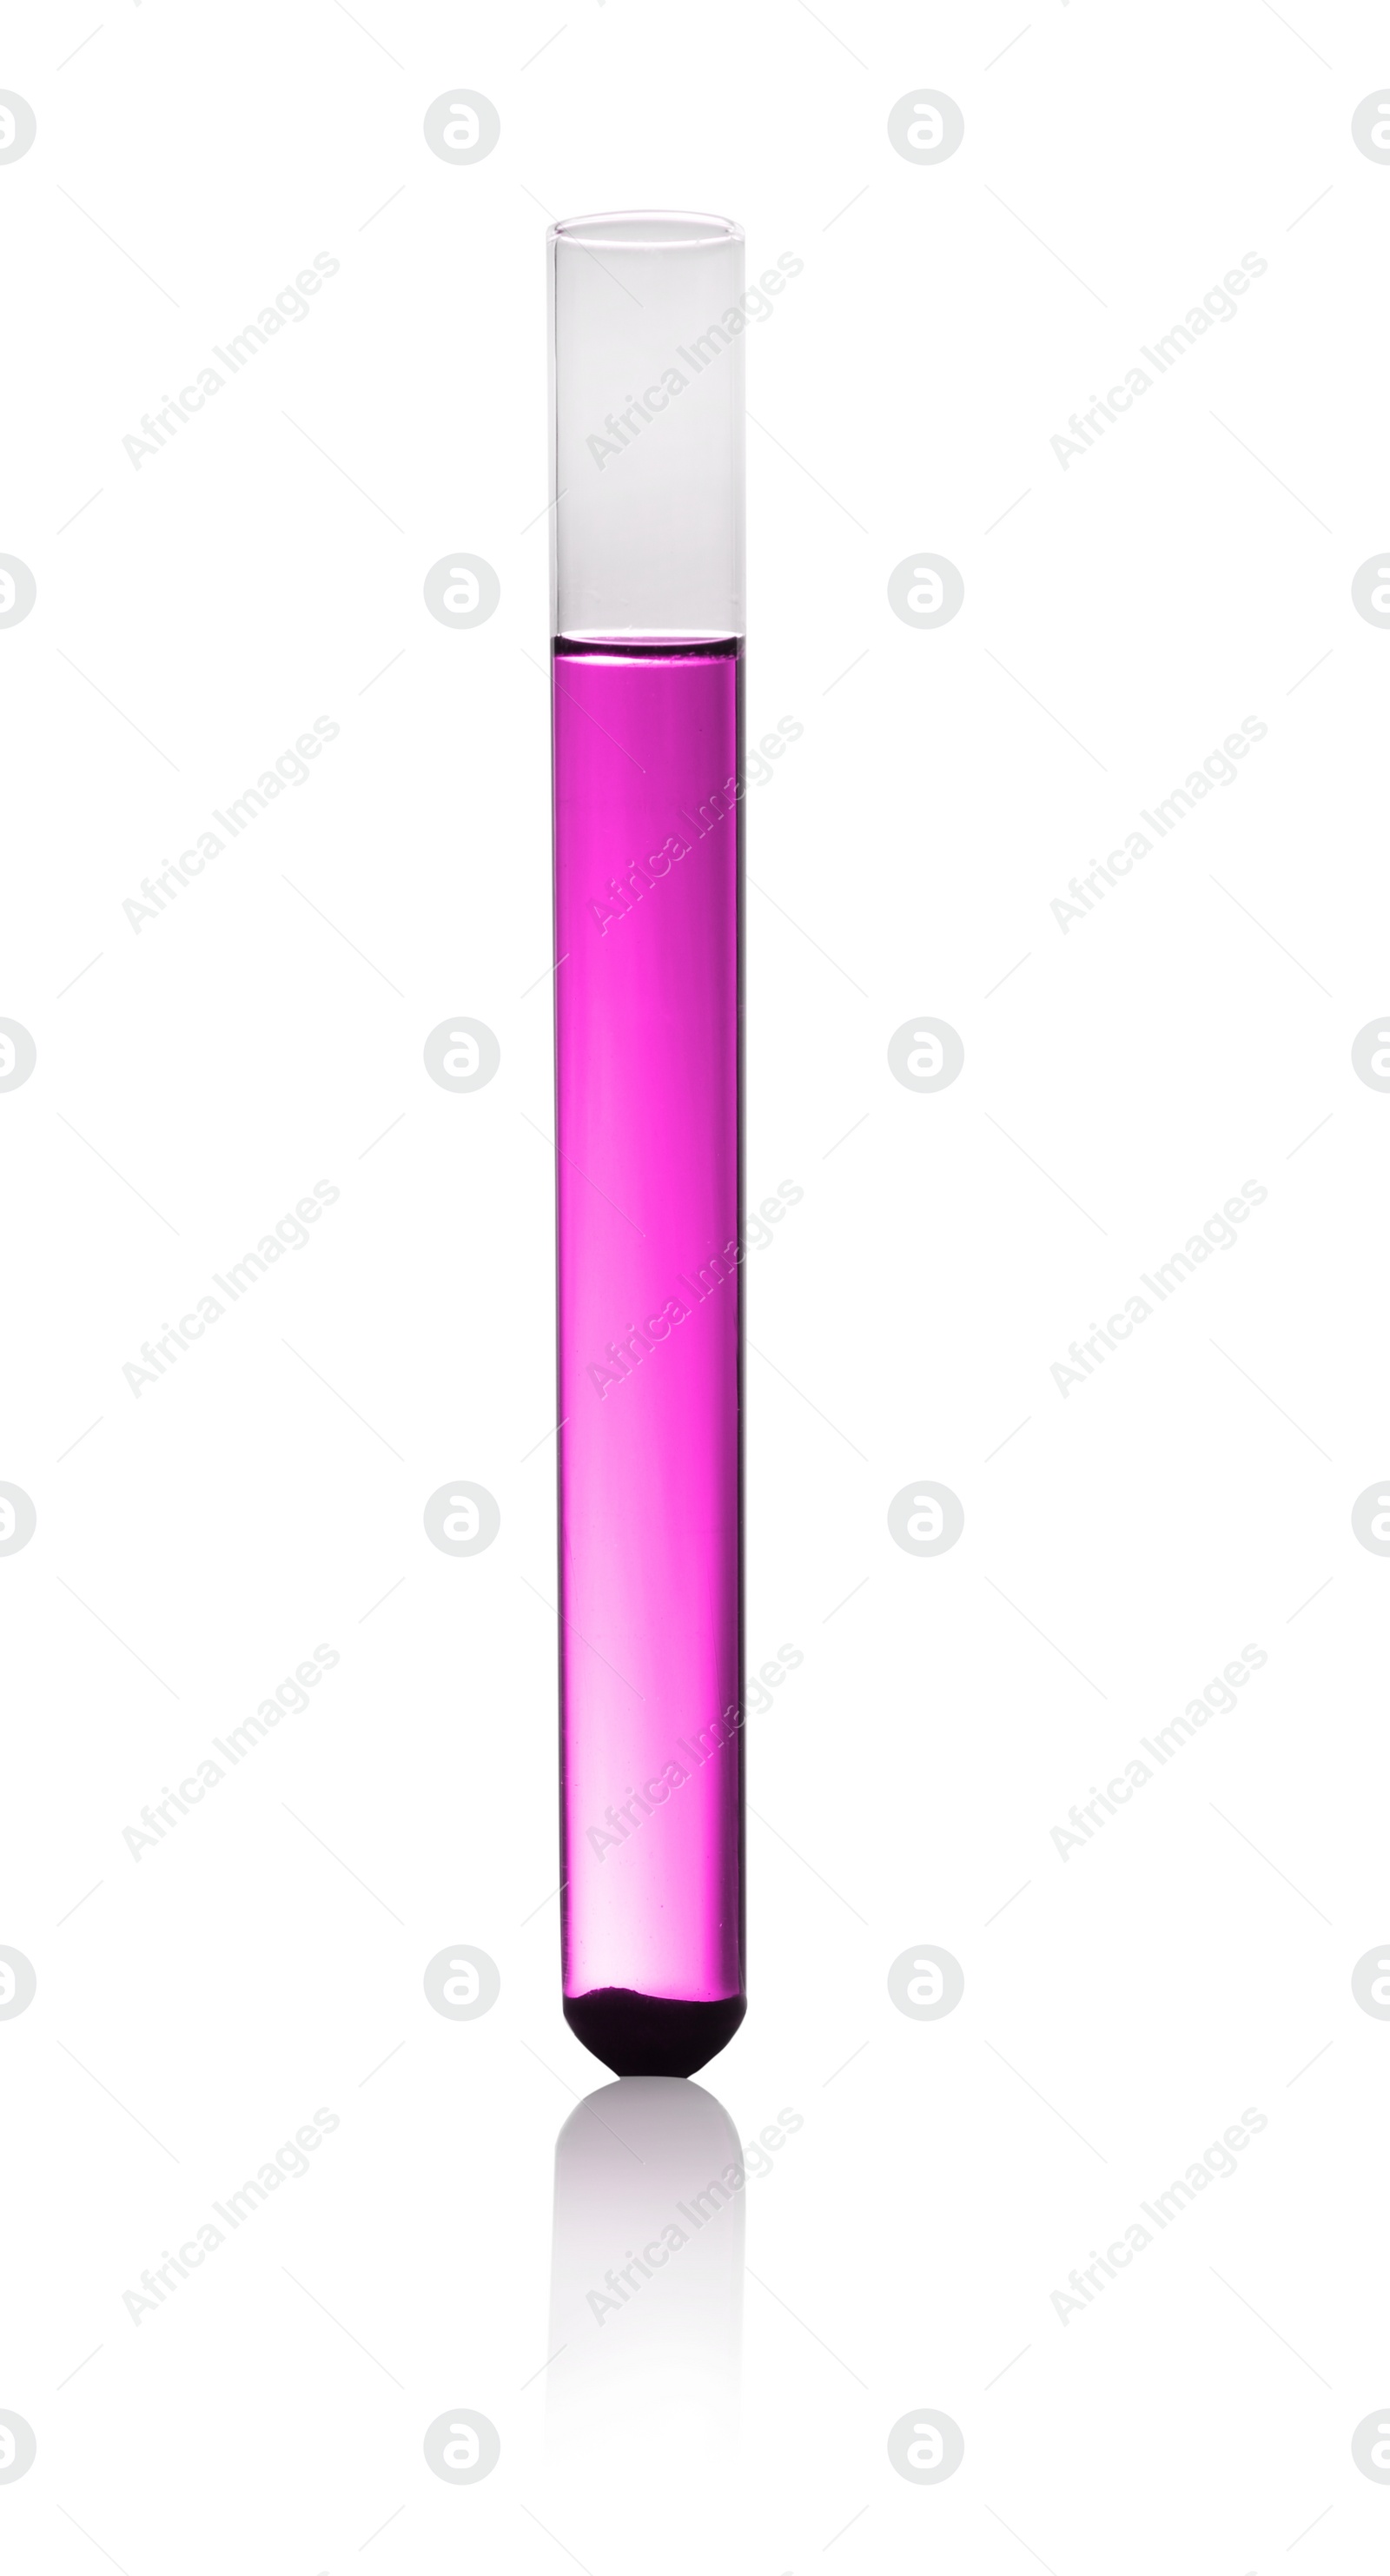 Image of Test tube with pink liquid isolated on white. Laboratory glassware